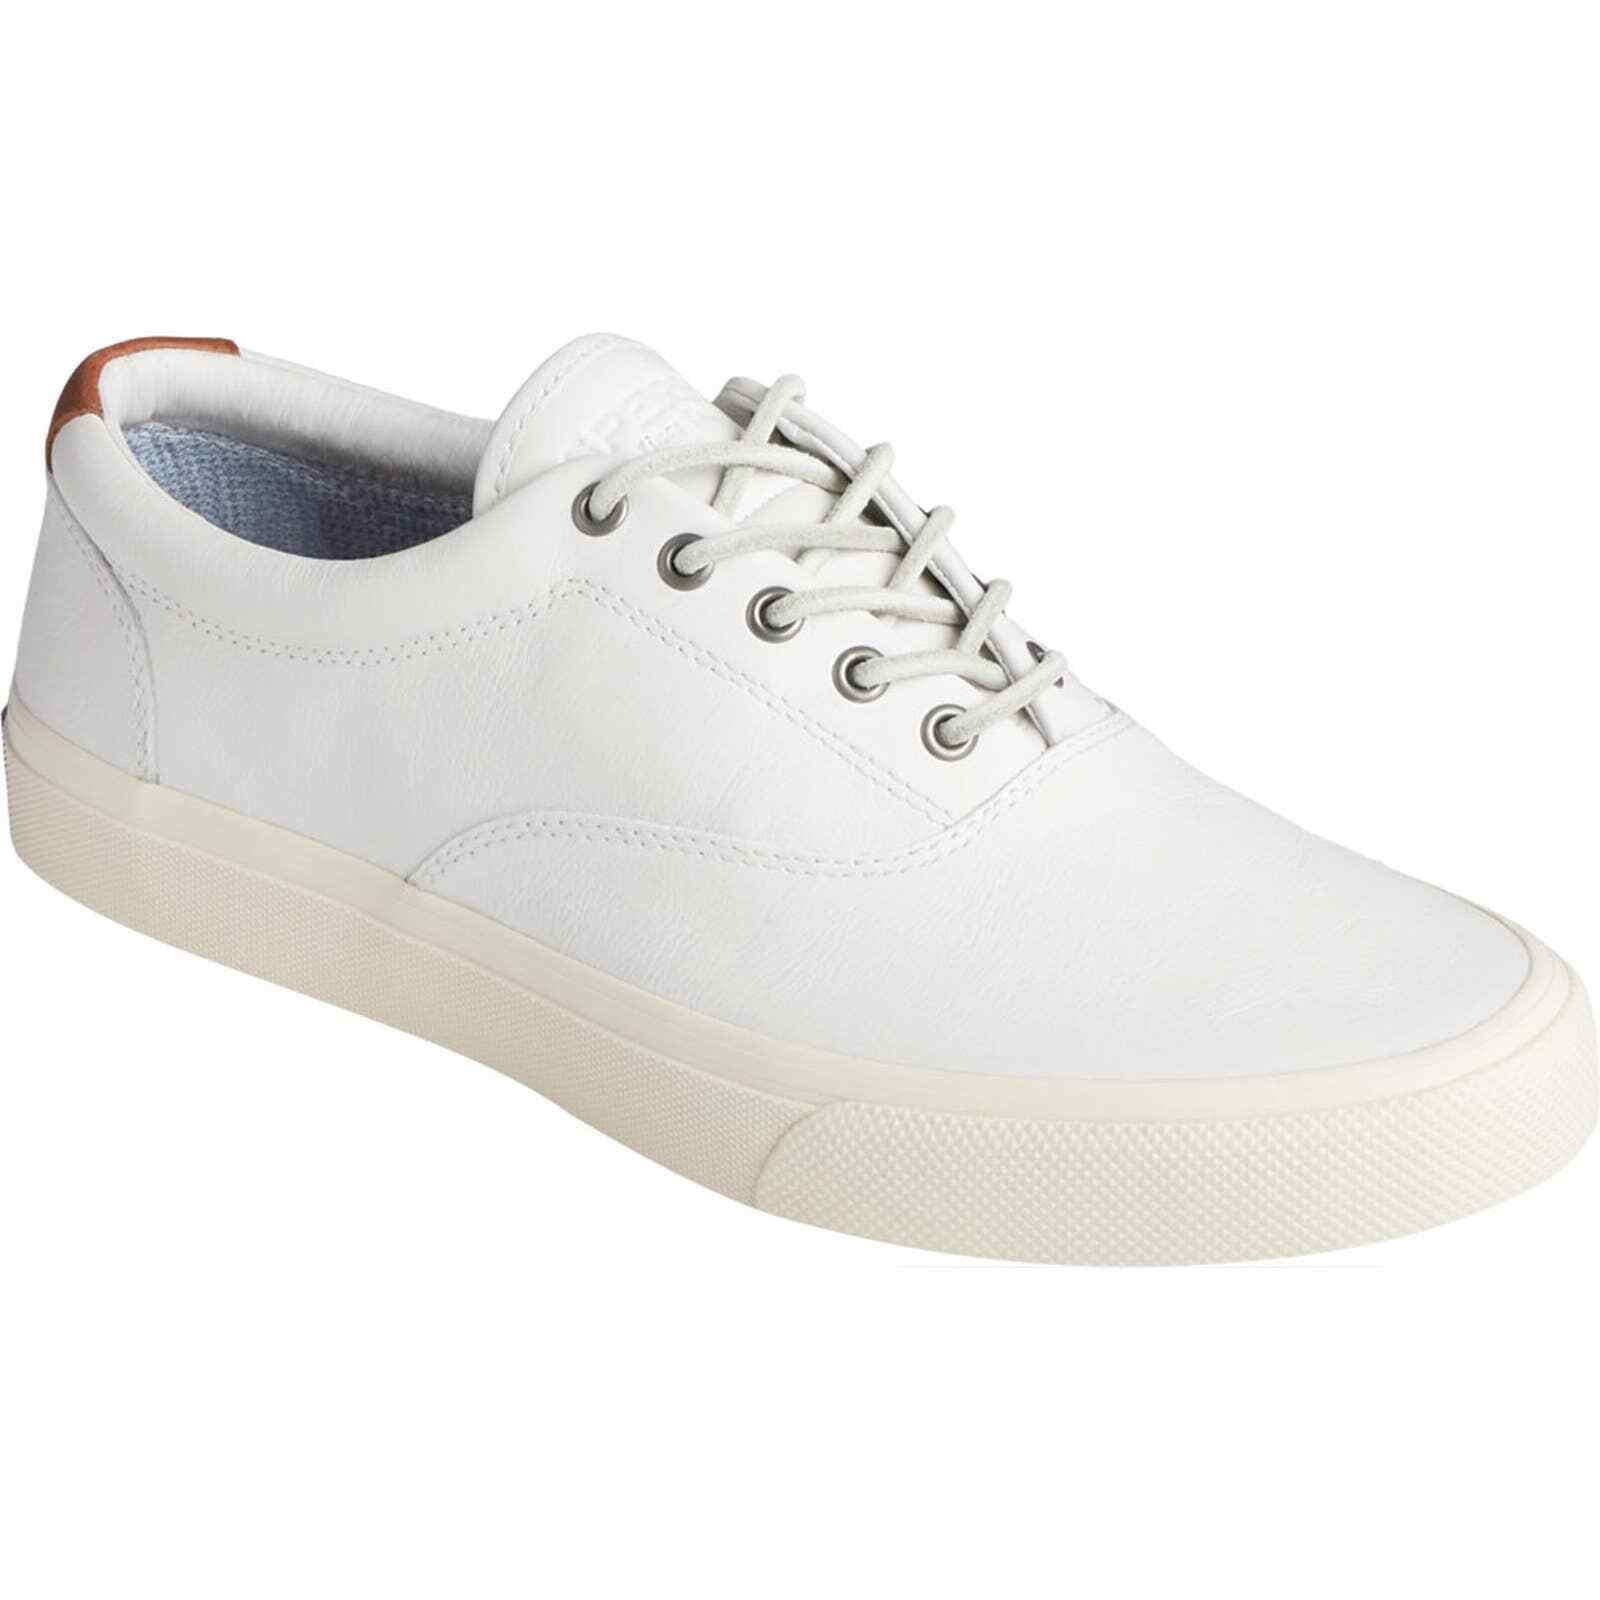 Primary image for Sperry Top-Sider Men Lace Up Sneakers Striper Plushwave CVO Size US 12M White